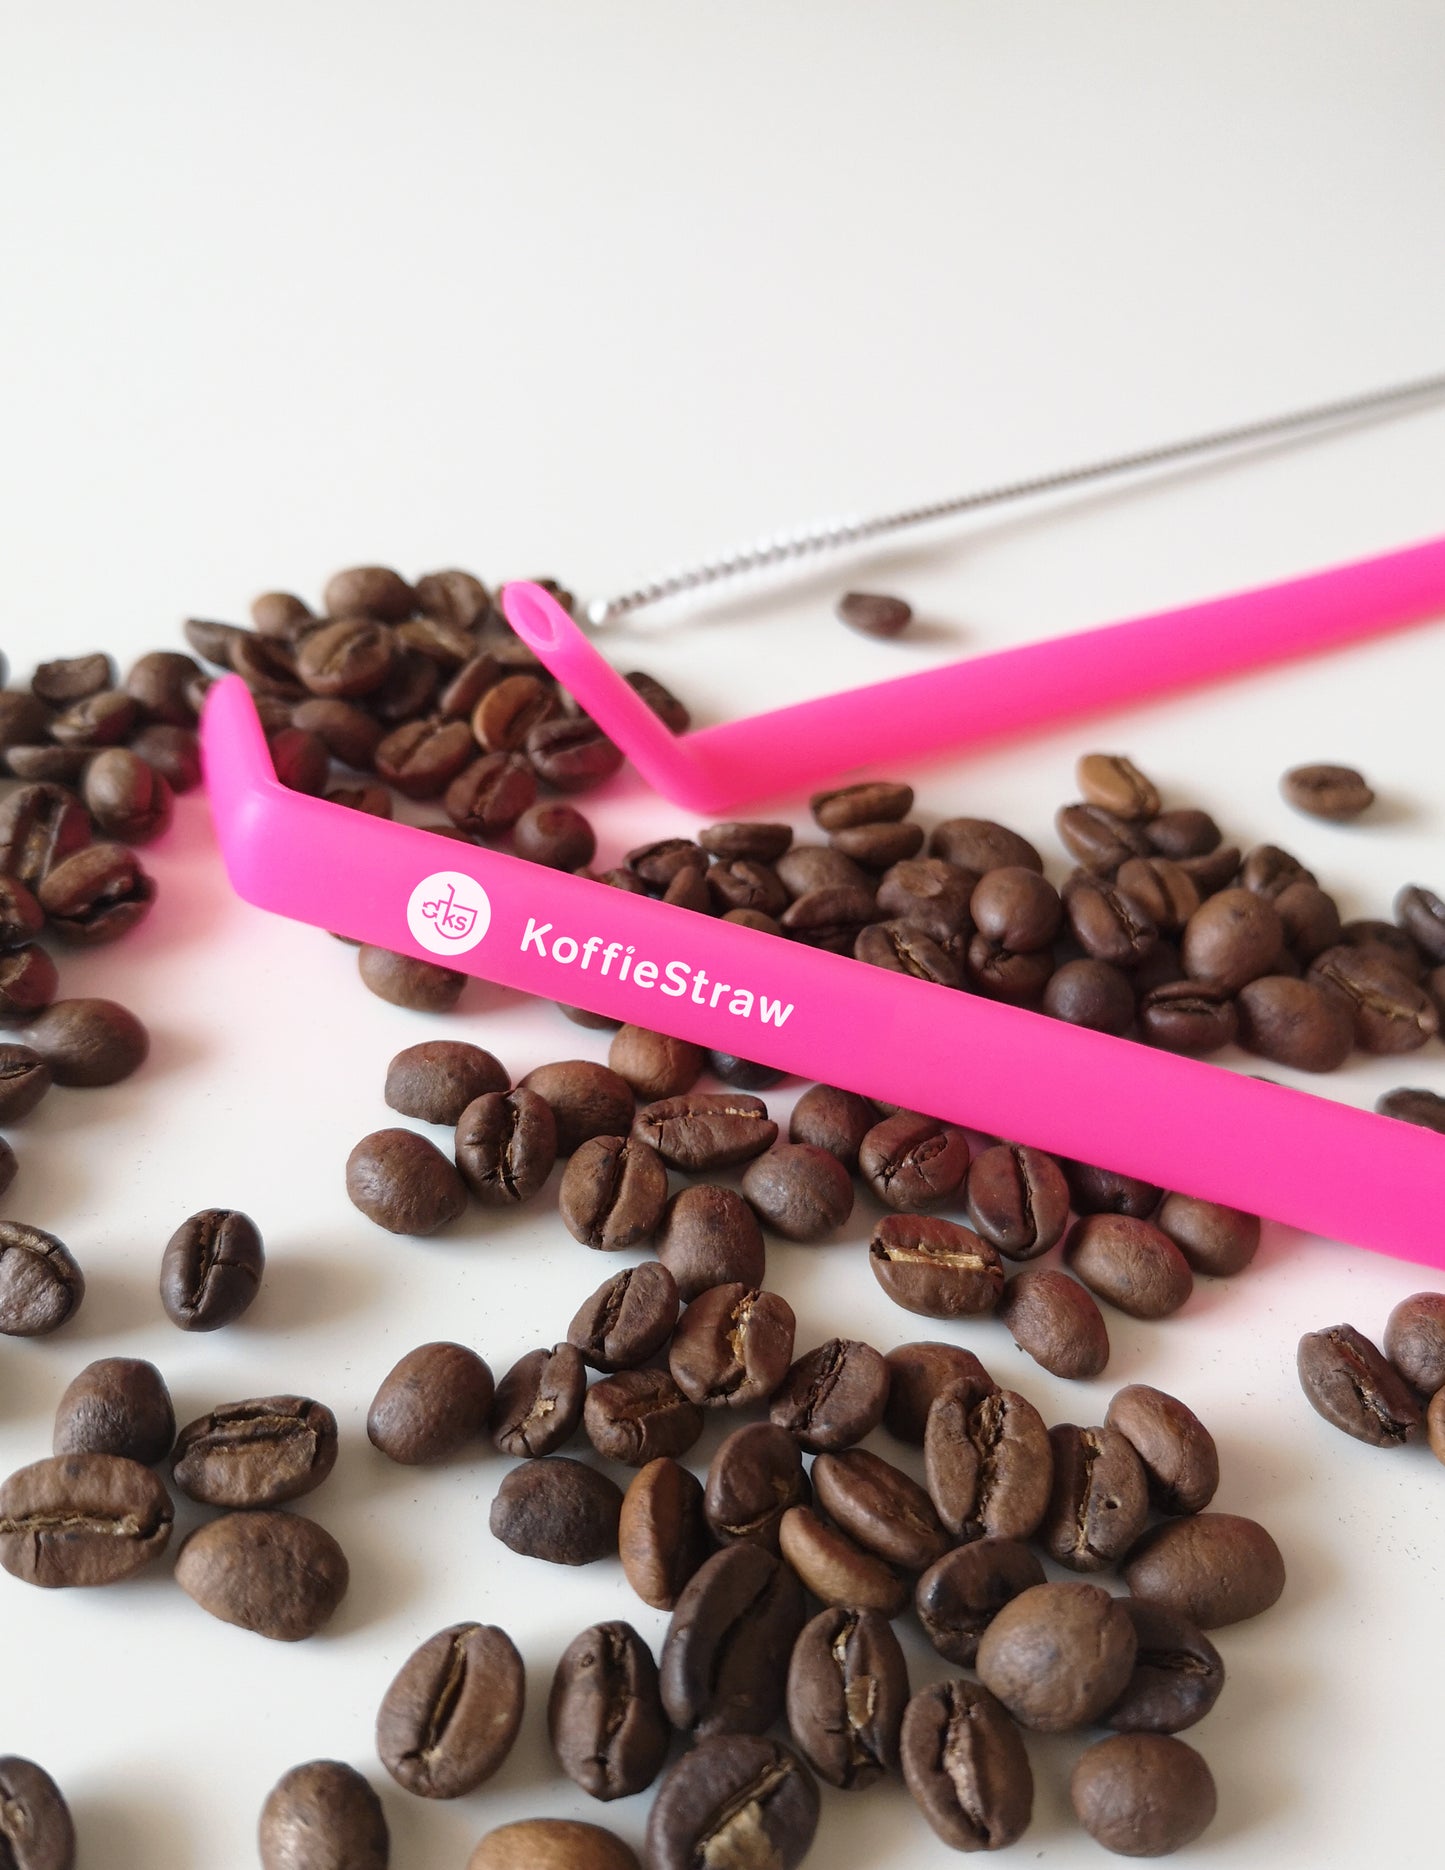 GIFT TUBE of Hot Pink KoffieStraws: 2x of 8" KoffieStraws and 1x stainless steel cleaning brush